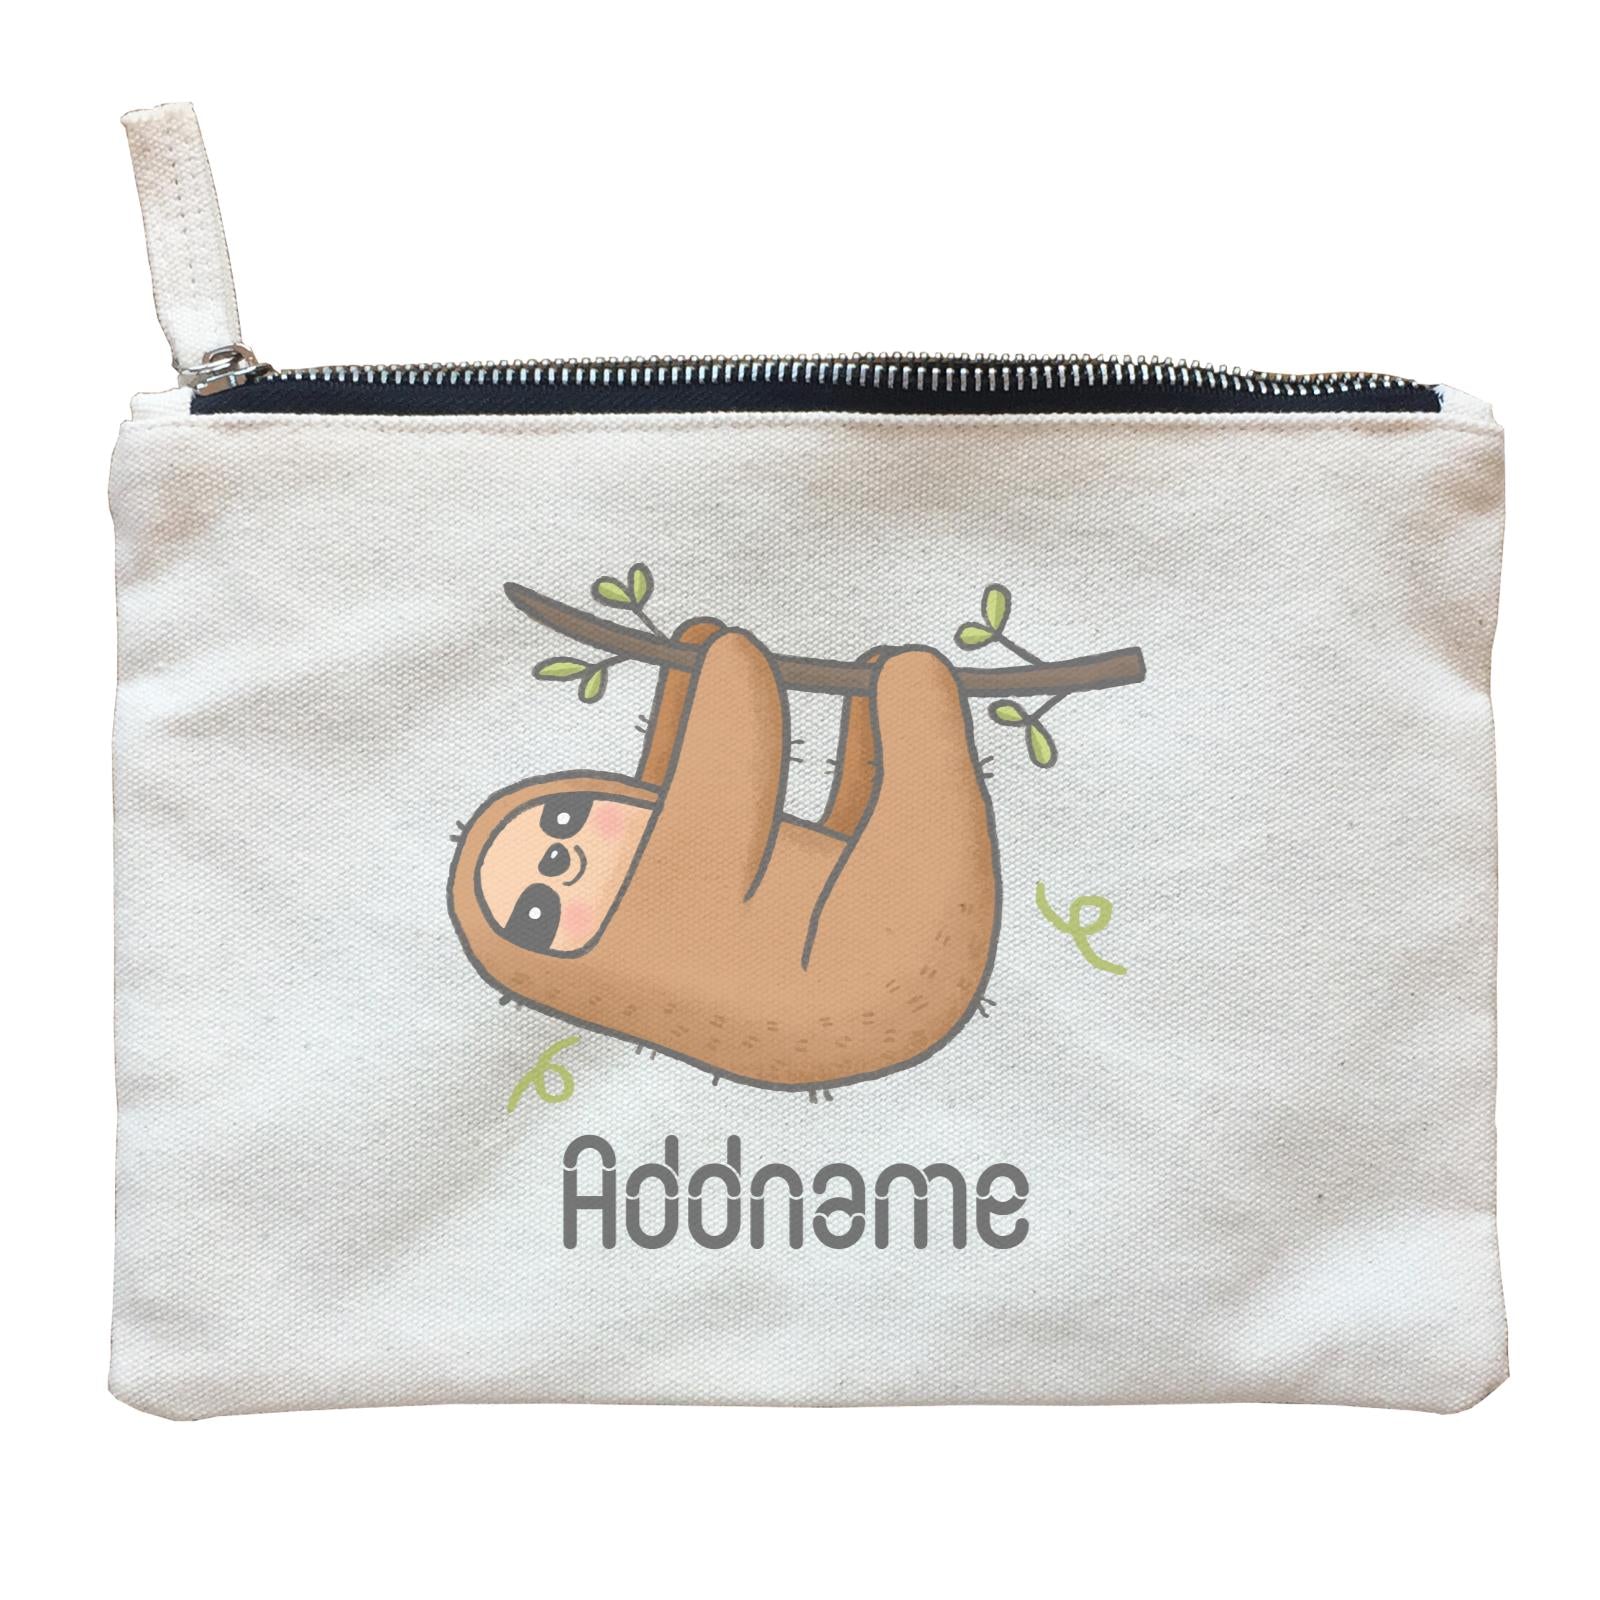 Cute Hand Drawn Style Sloth Addname Zipper Pouch